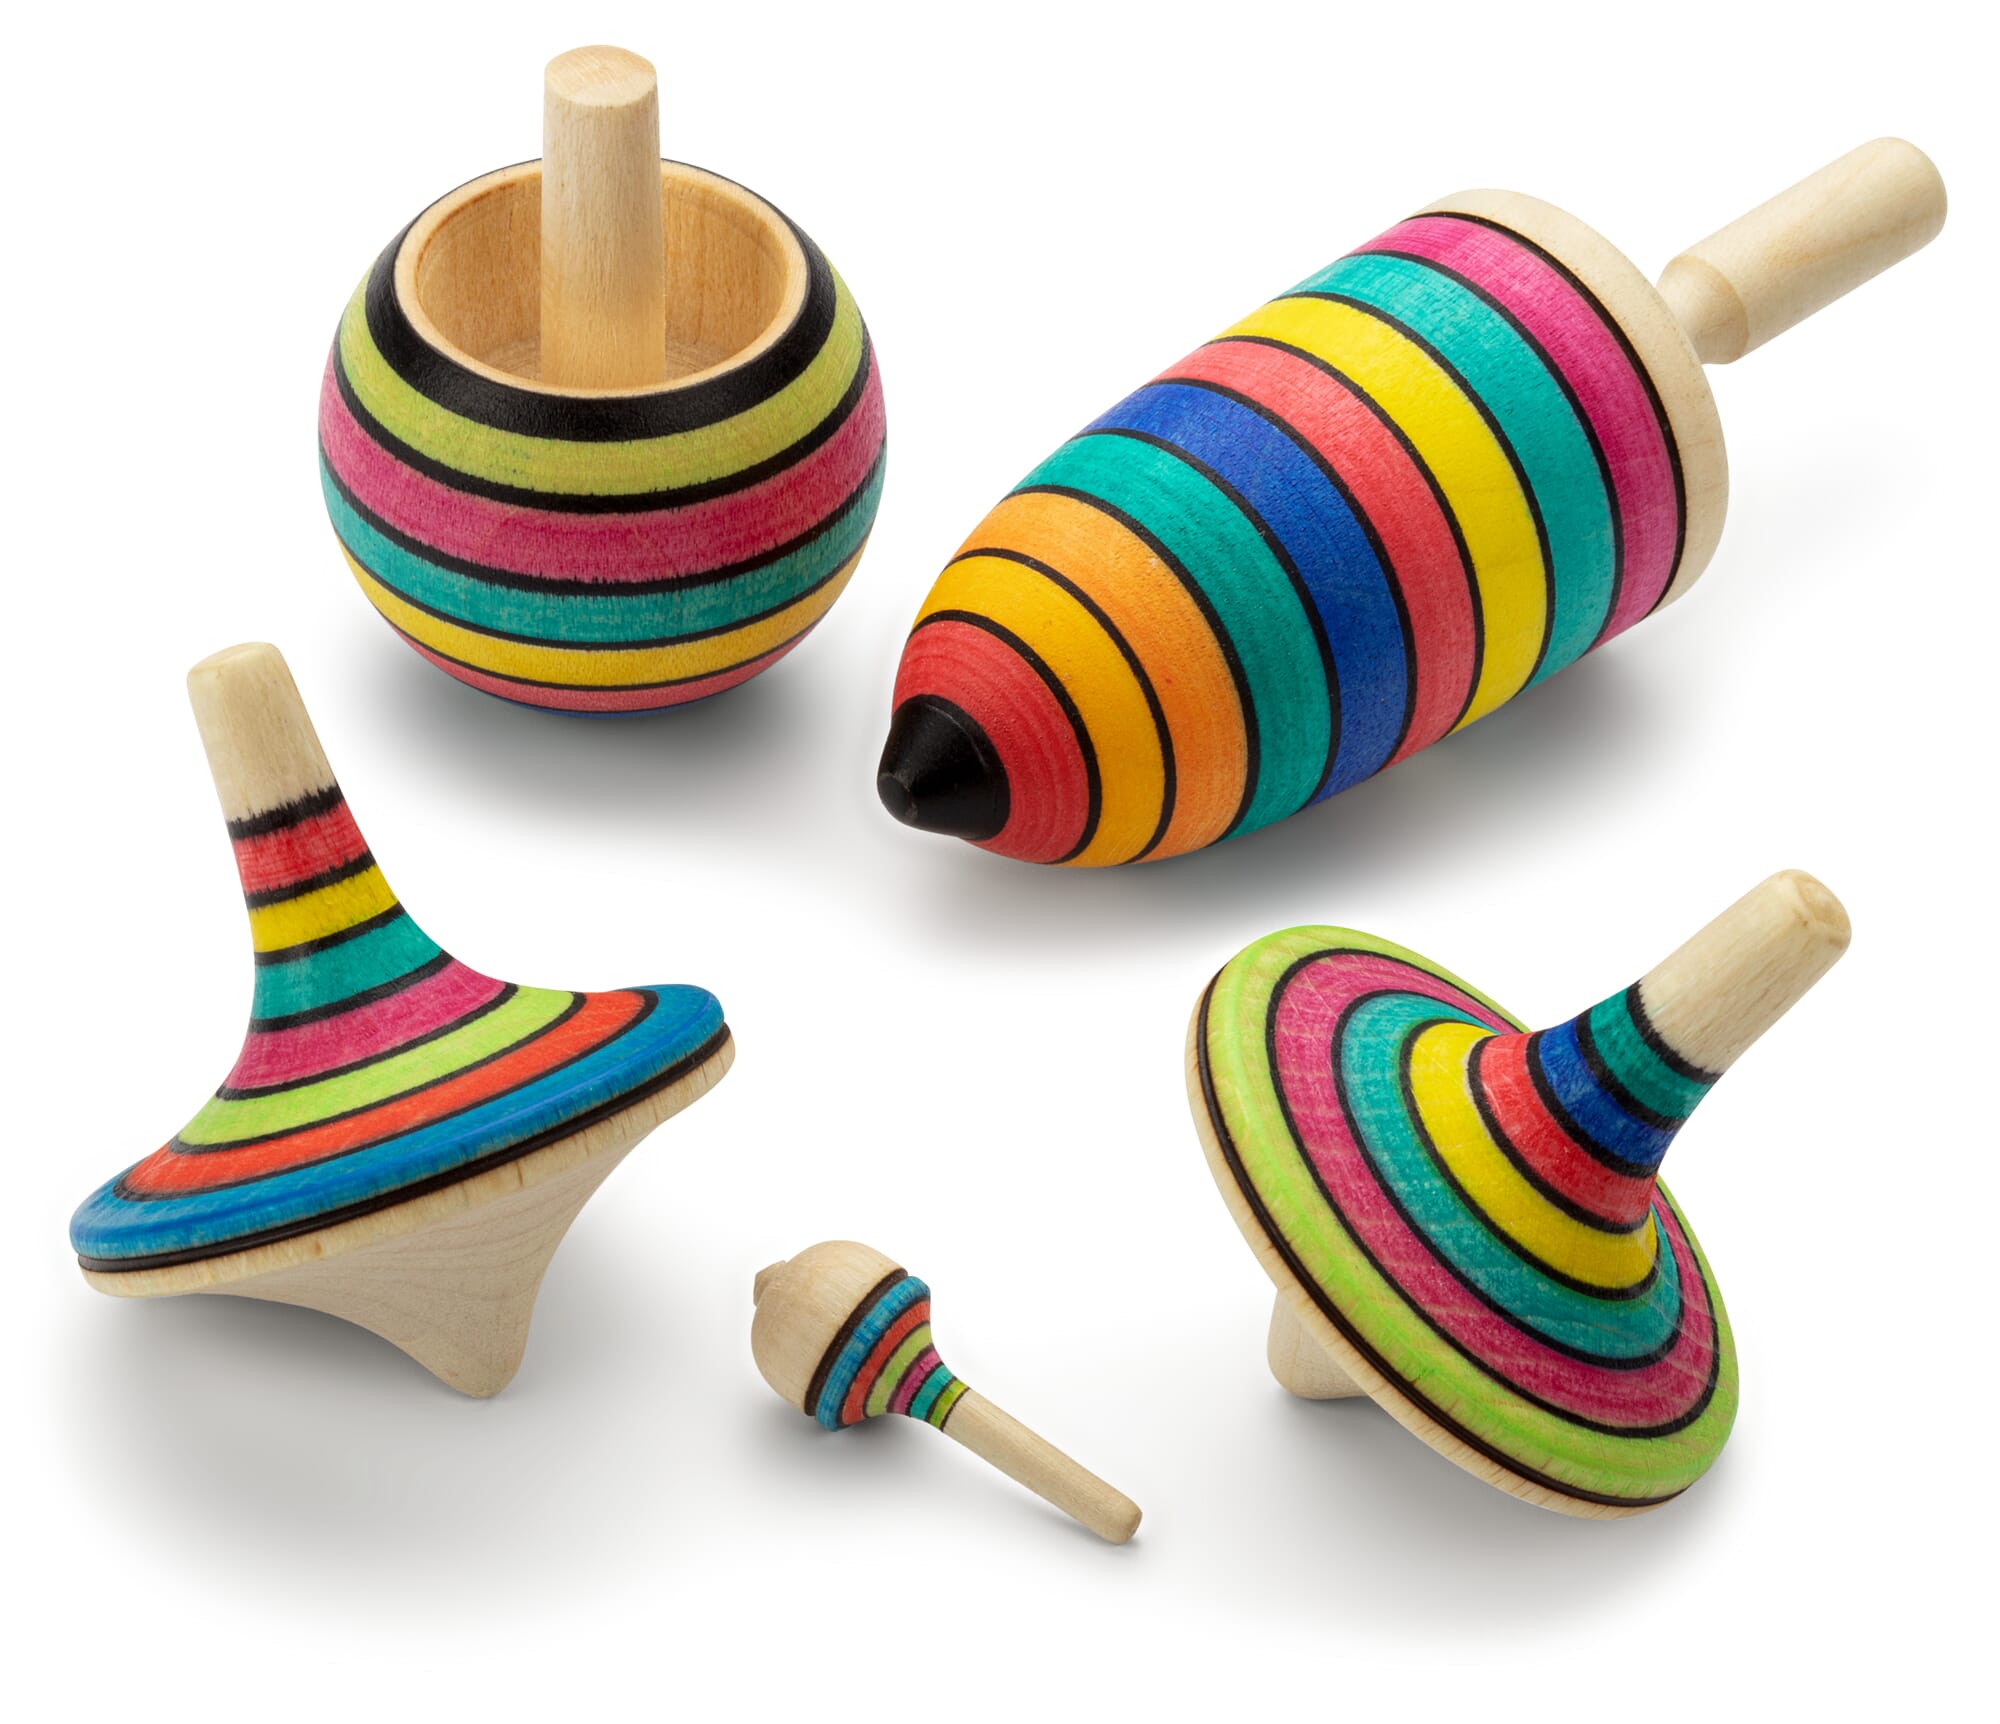 Jumbo Hand Spinning Top - For Small Hands